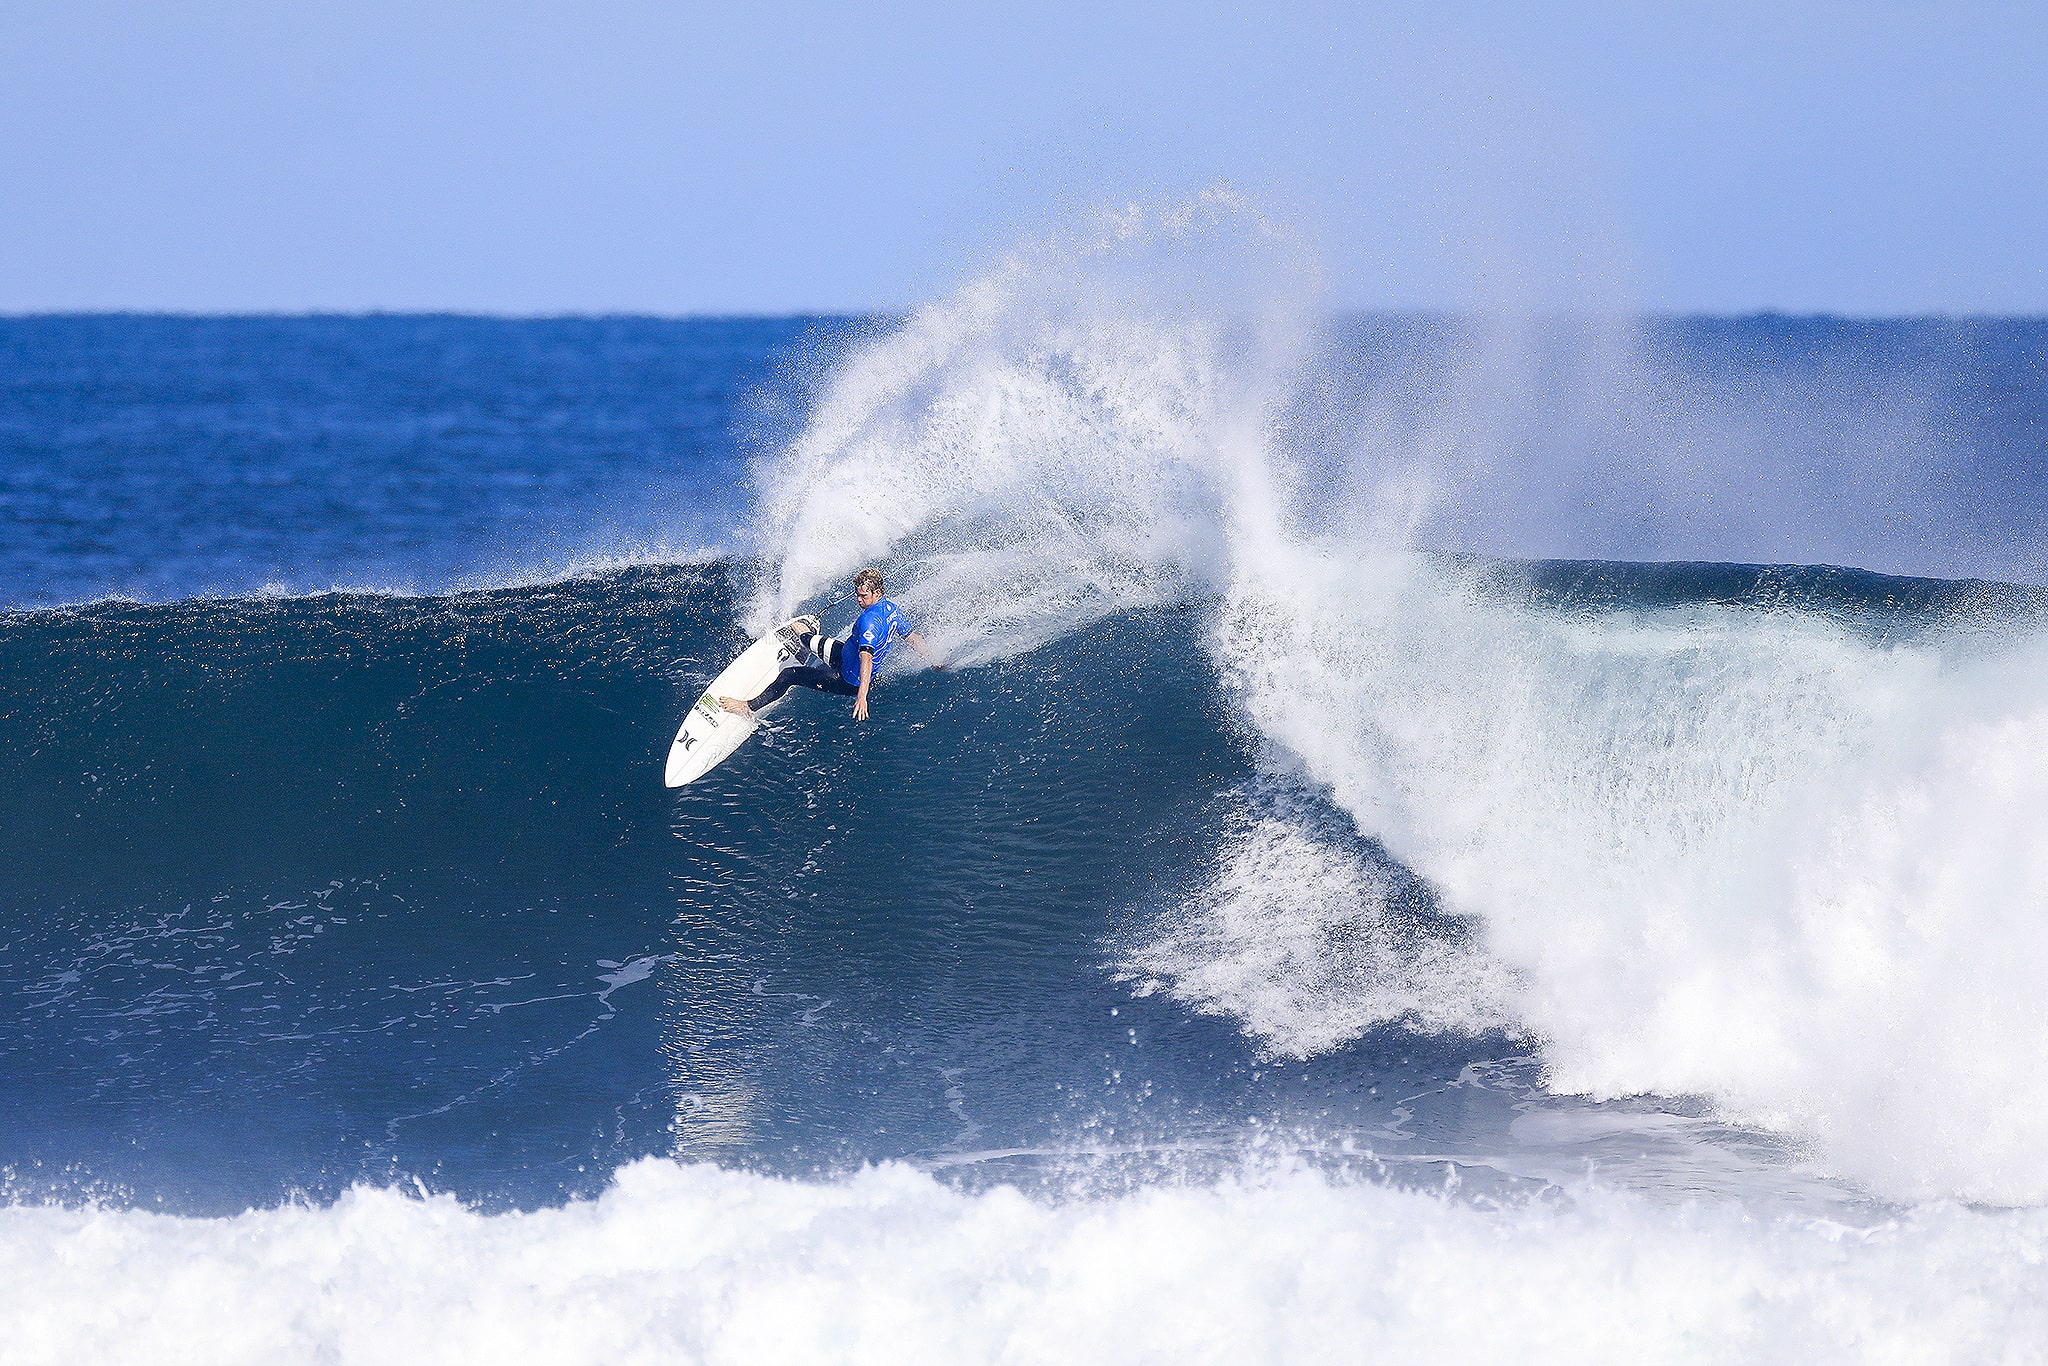 Surfer in the water during Margaret River Pro